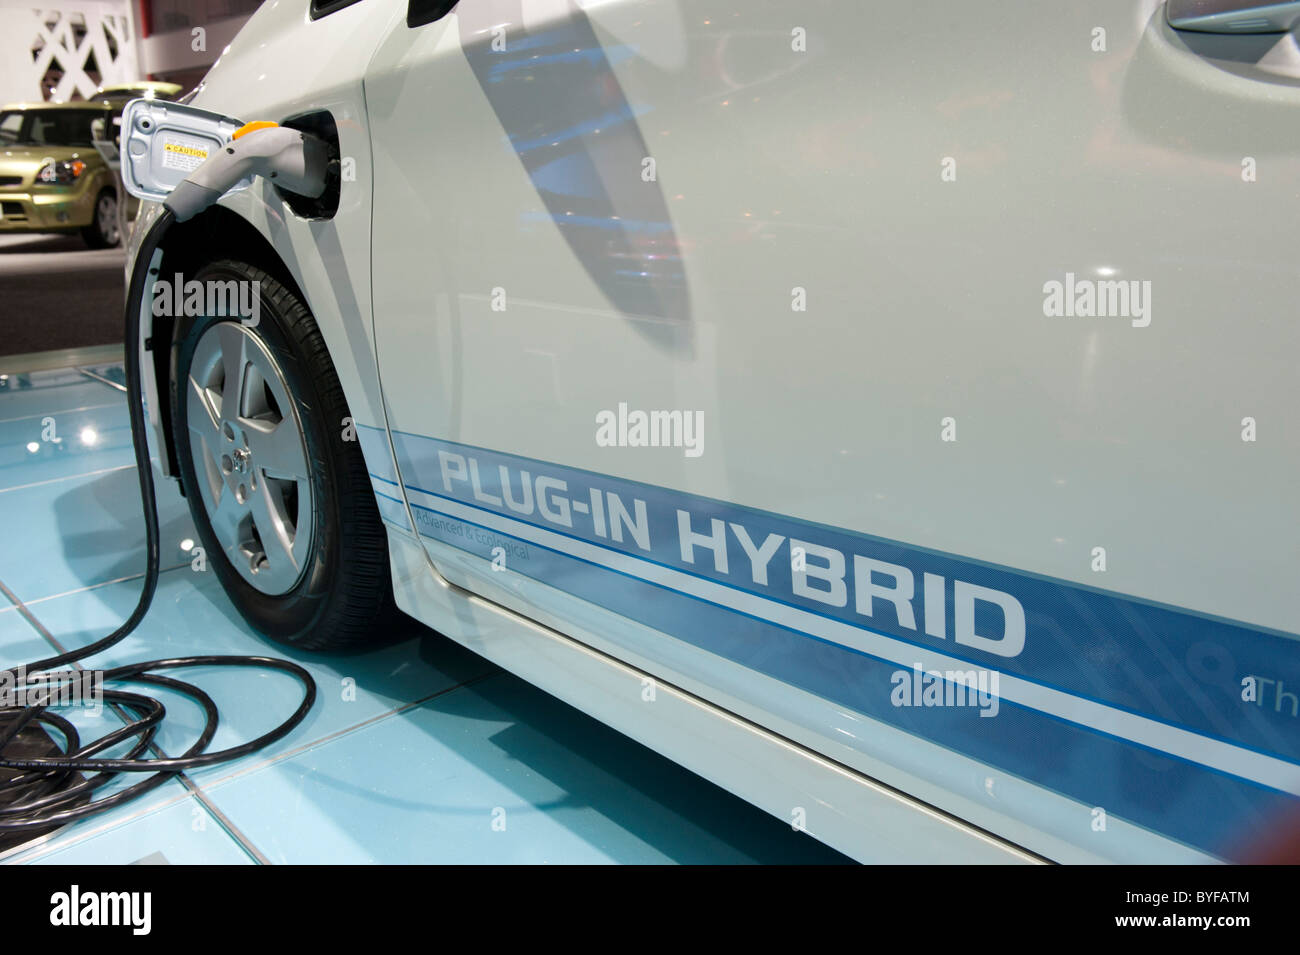 2012 Toyota Prius plug-in hybrid at the 2011 North American International Auto Show in Detroit Michigan USA Stock Photo